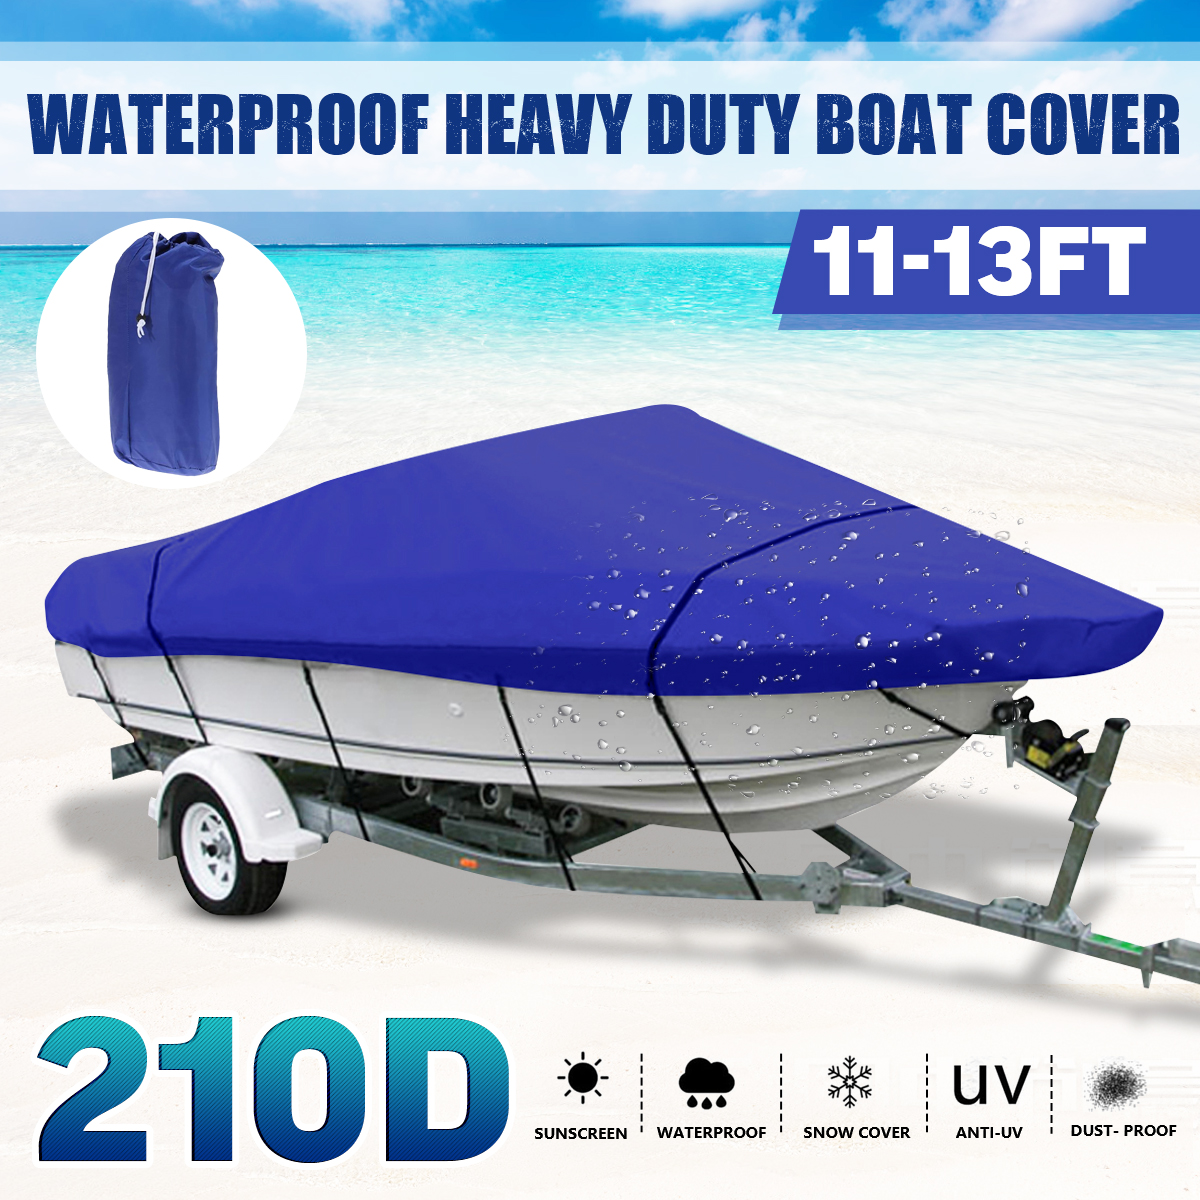 Heavy Duty 210D Oxford Sunproof Waterproof Boat Cover Protector for Small Boat pologyase 112 x 48 in Boat Cover